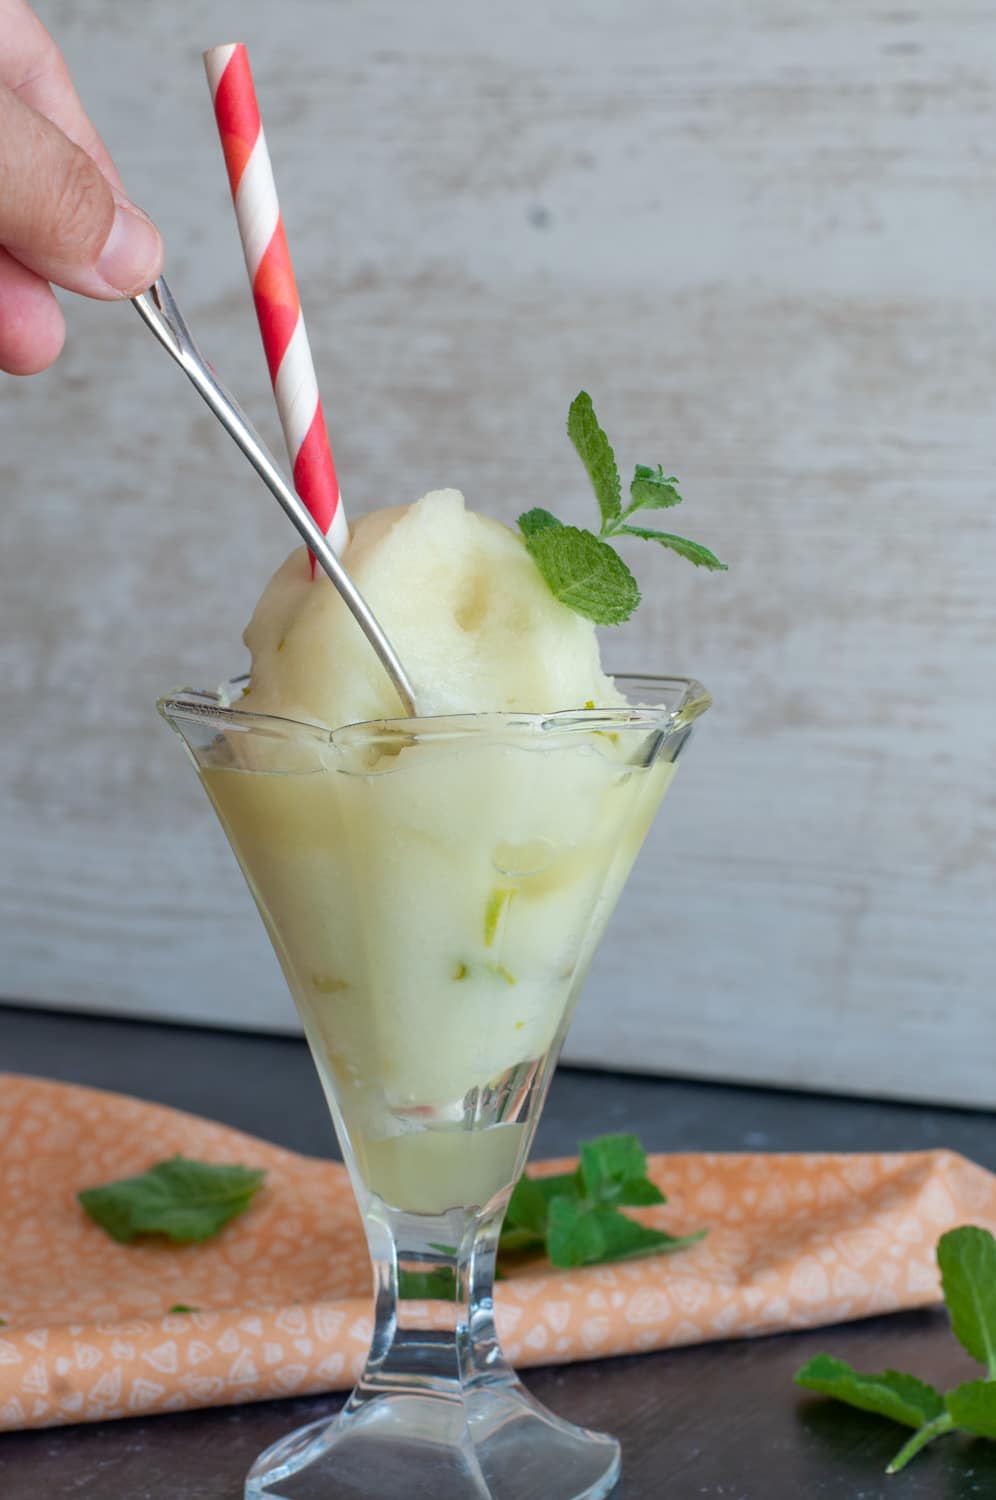 Italian Lime sorbetto served in a glass